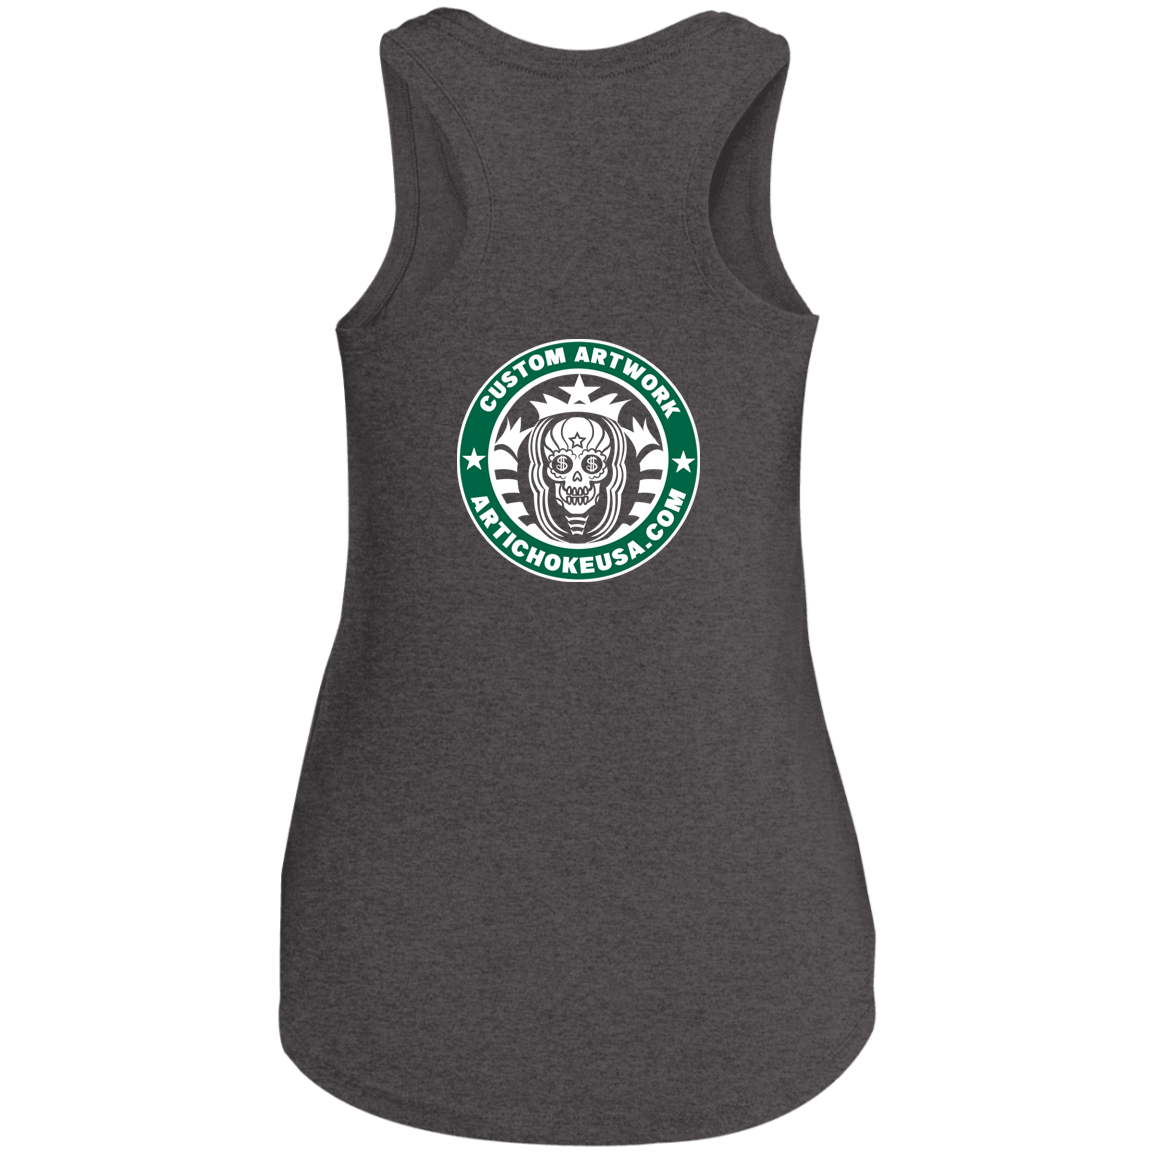 ArtichokeUSA Custom Design. Money Can't Buy Happiness But It Can Buy You Coffee. Ladies' Tri Racerback Tank